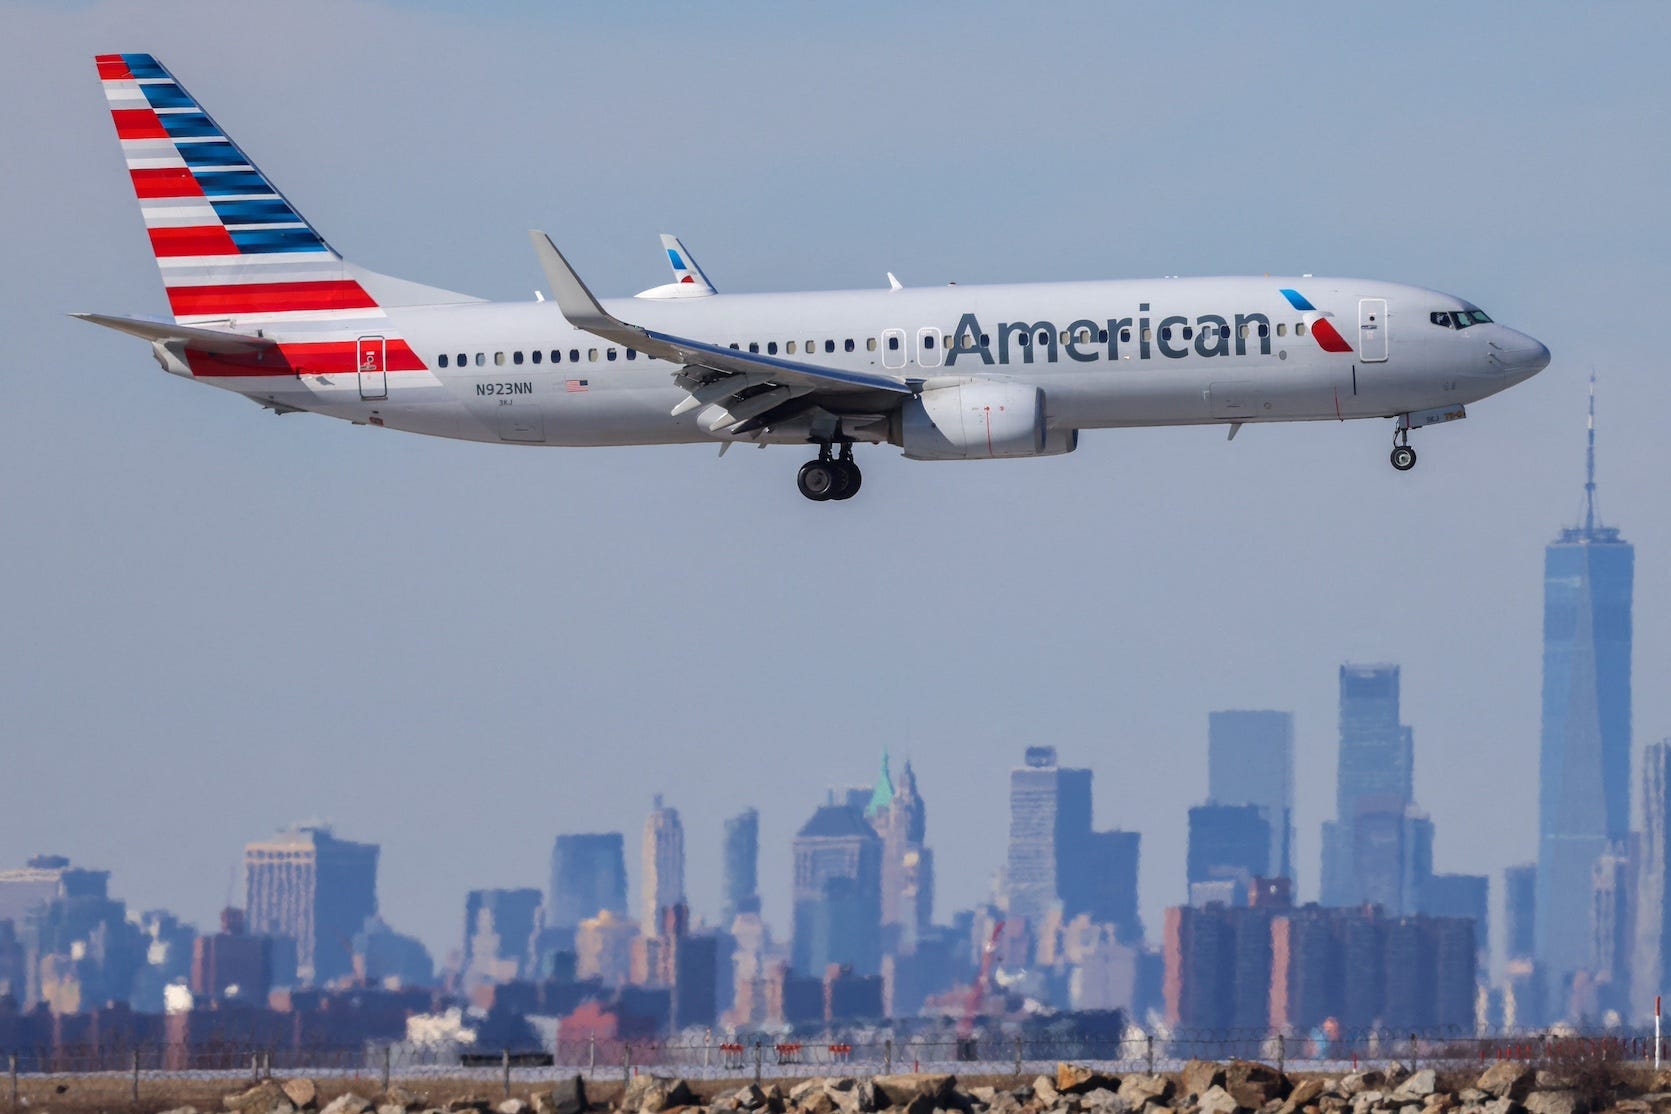 microsoft, american airlines pilots say there's been a 'significant spike' in safety problems